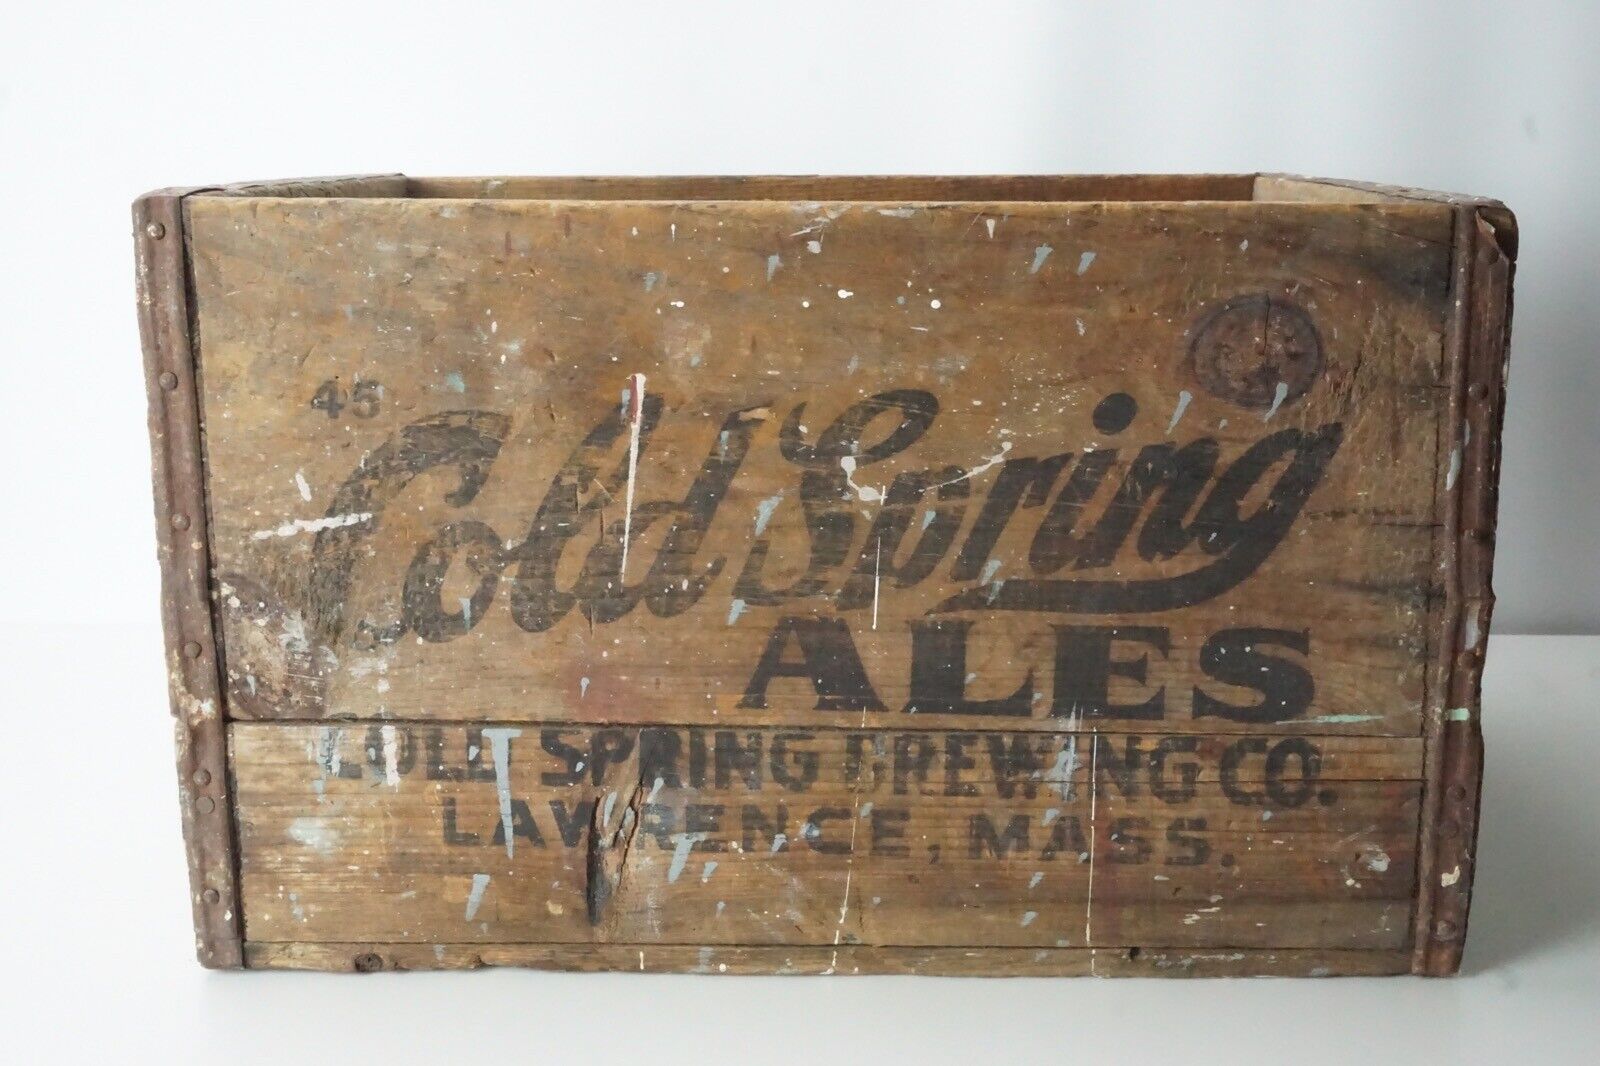 Cold Spring Ales Brewing Co Beer Lager Vintage Box Crate Lawrence MA